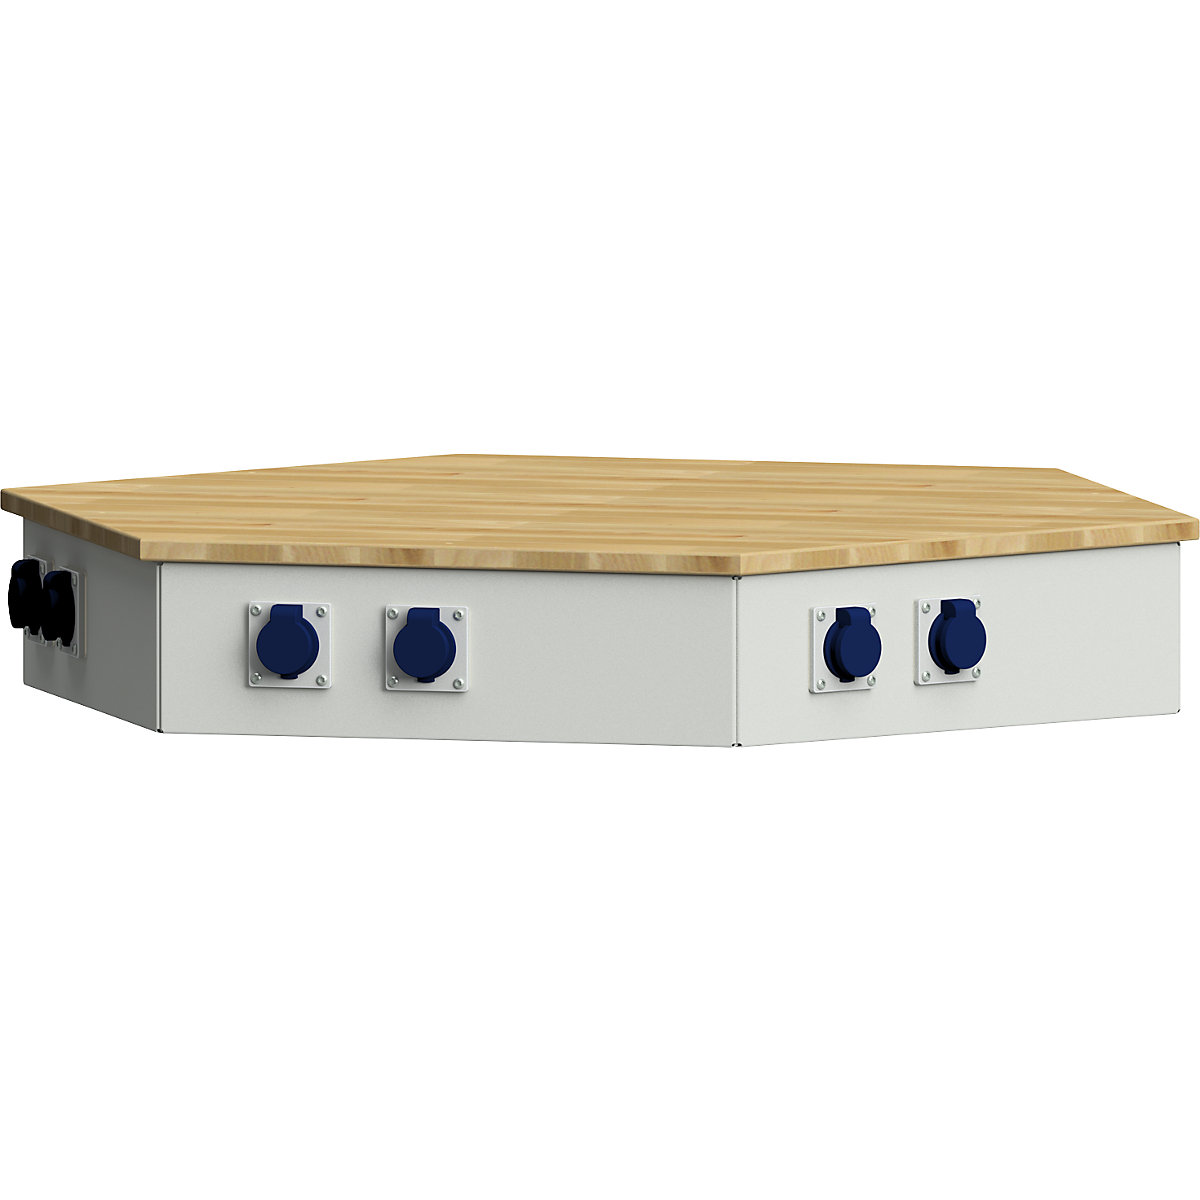 Power block for group workstations – ANKE